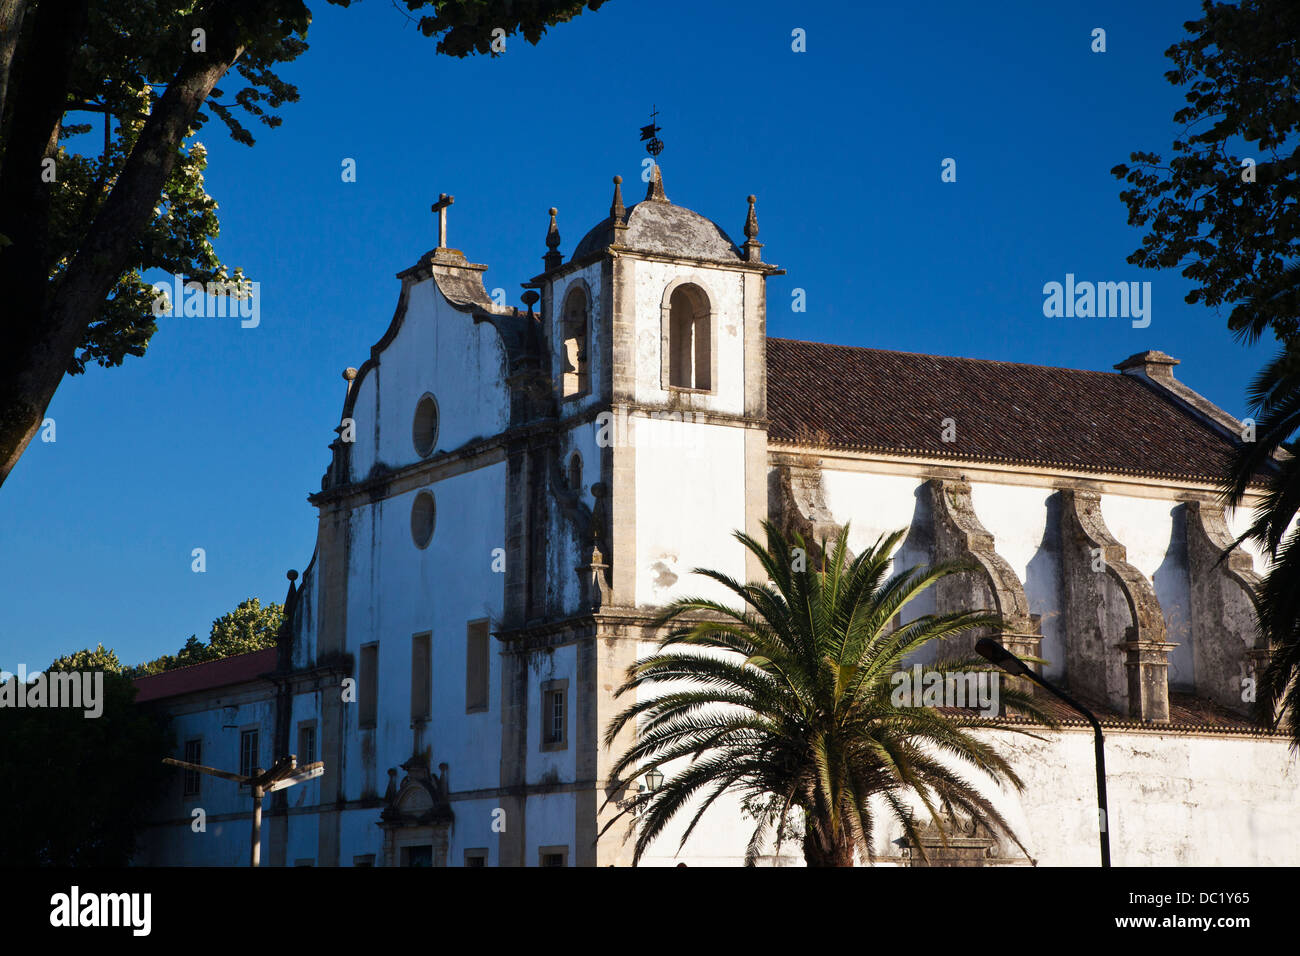 Europe, Portugal, Tomar. The Convent of San Francisco de Tomar, founded in 1624 and completed in 1660. Stock Photo